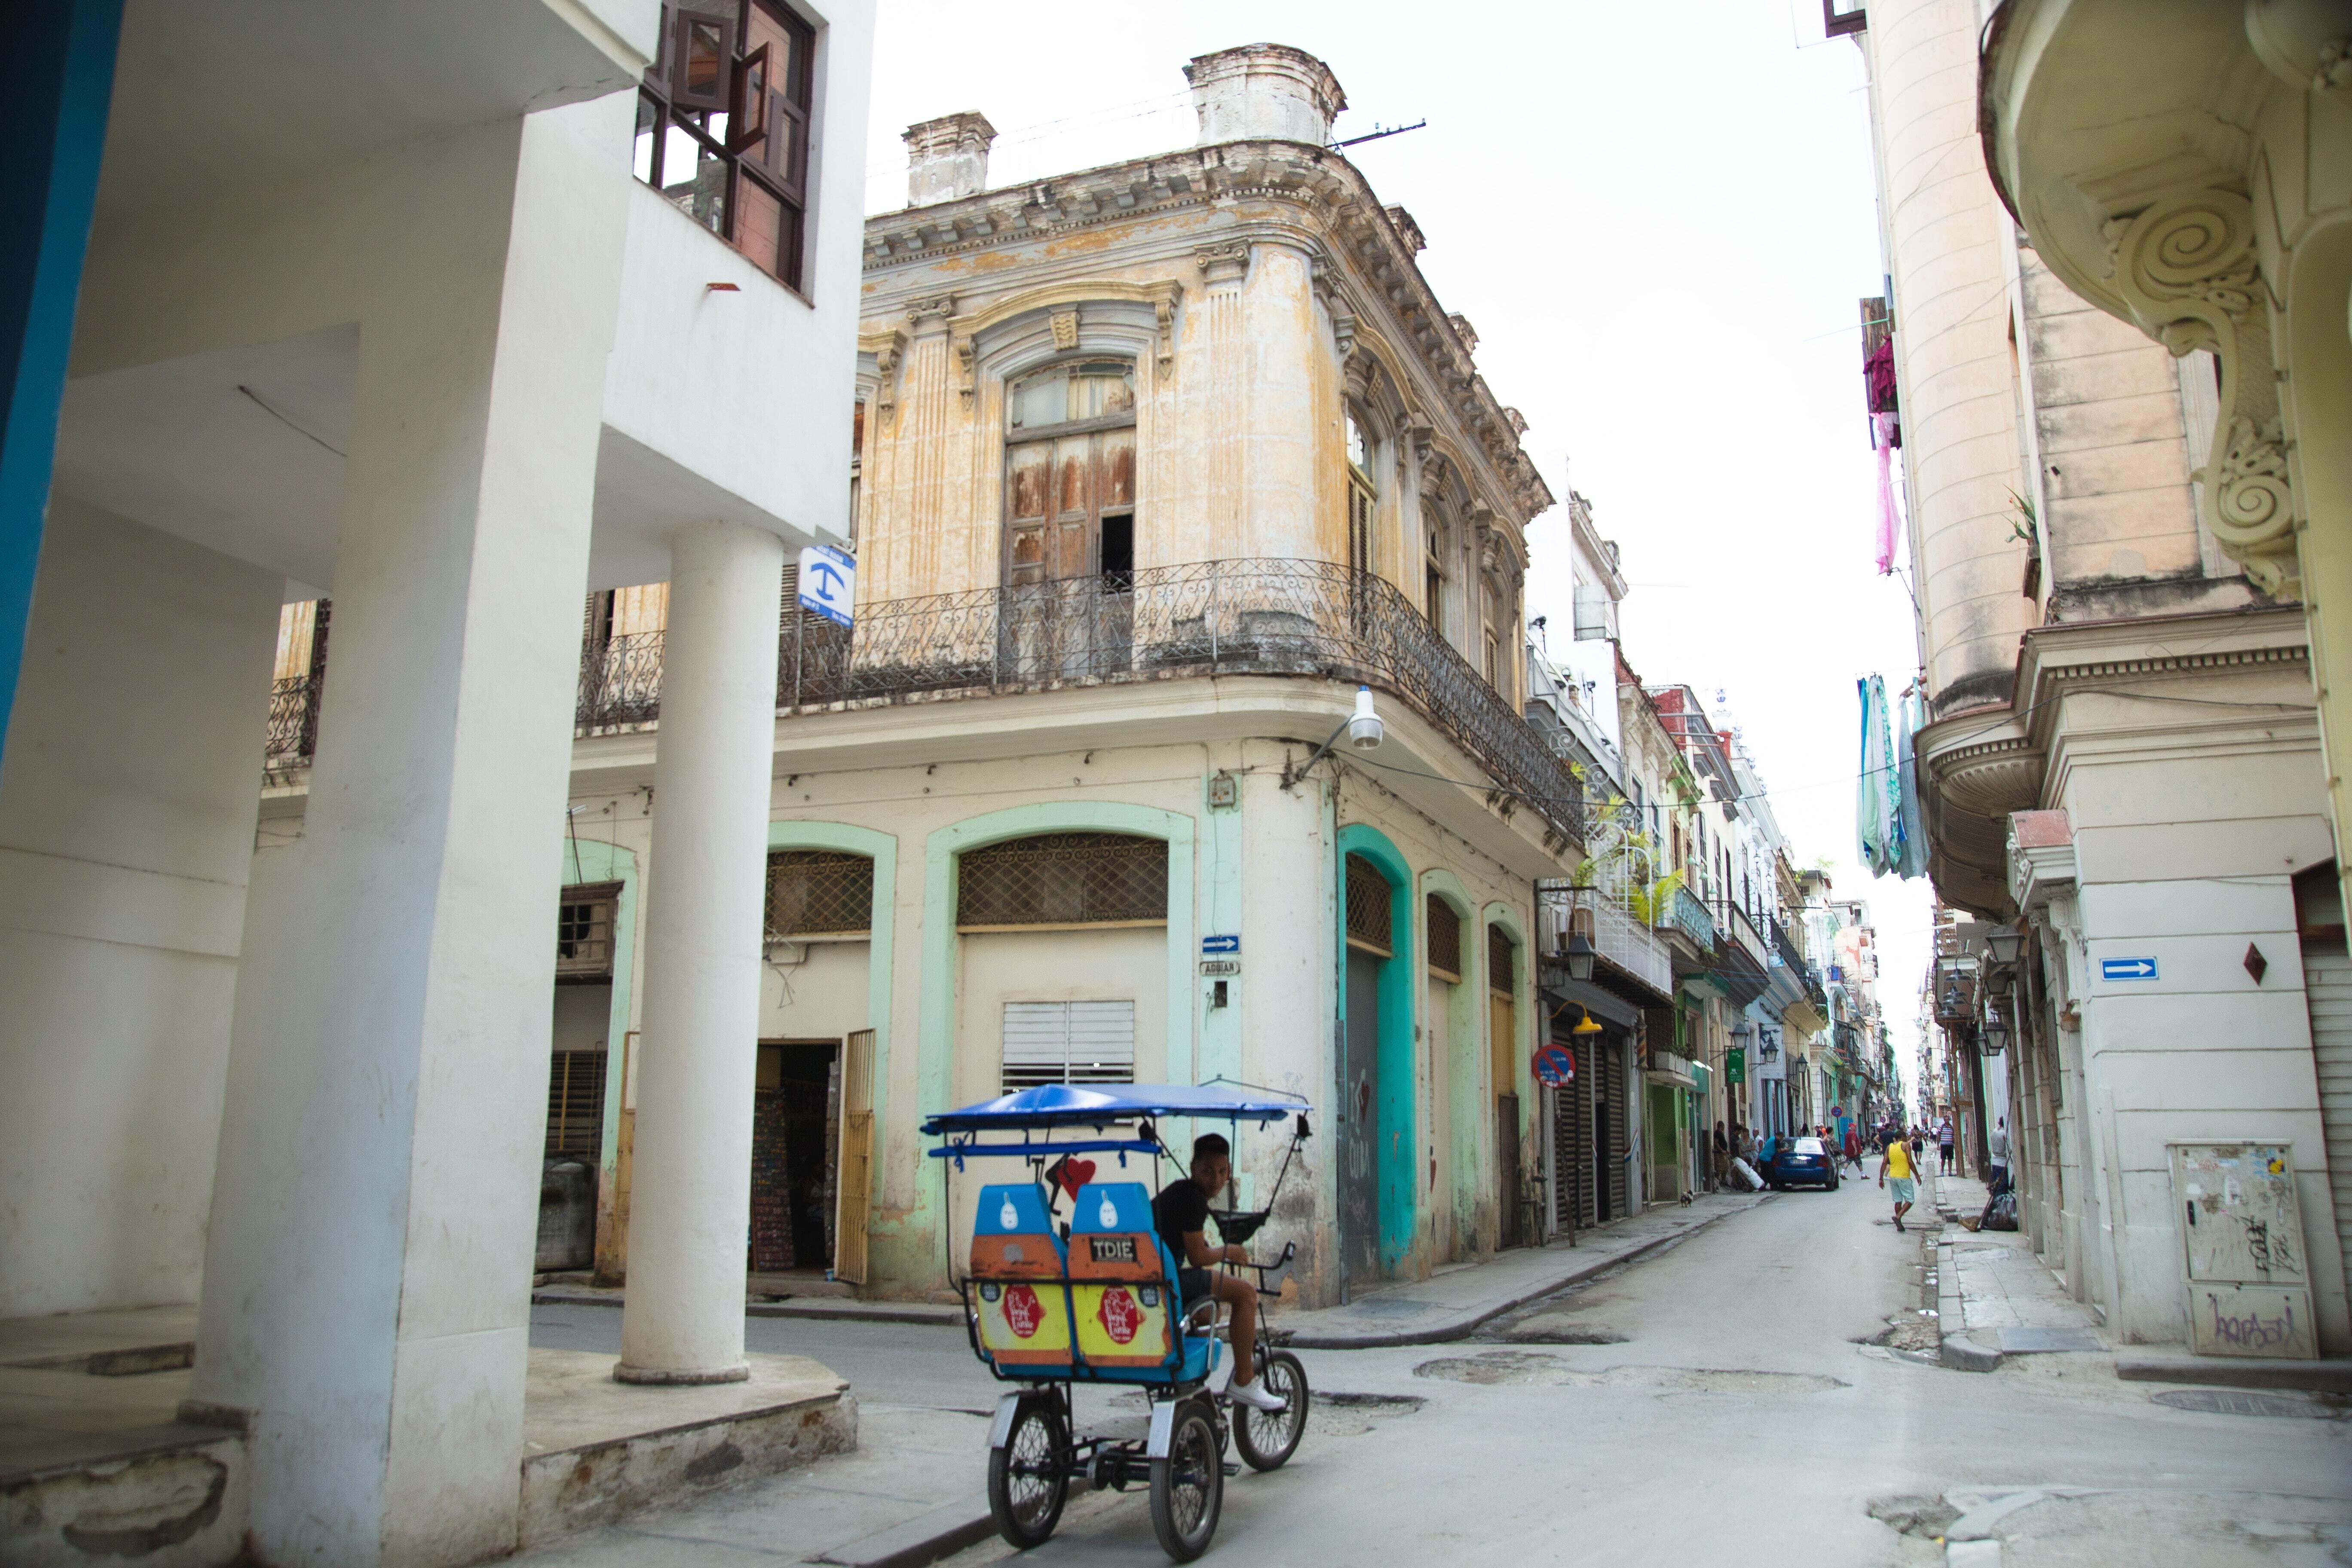 Travelers Will Become Ineligible for the Visa Waiver Program After Visiting Cuba